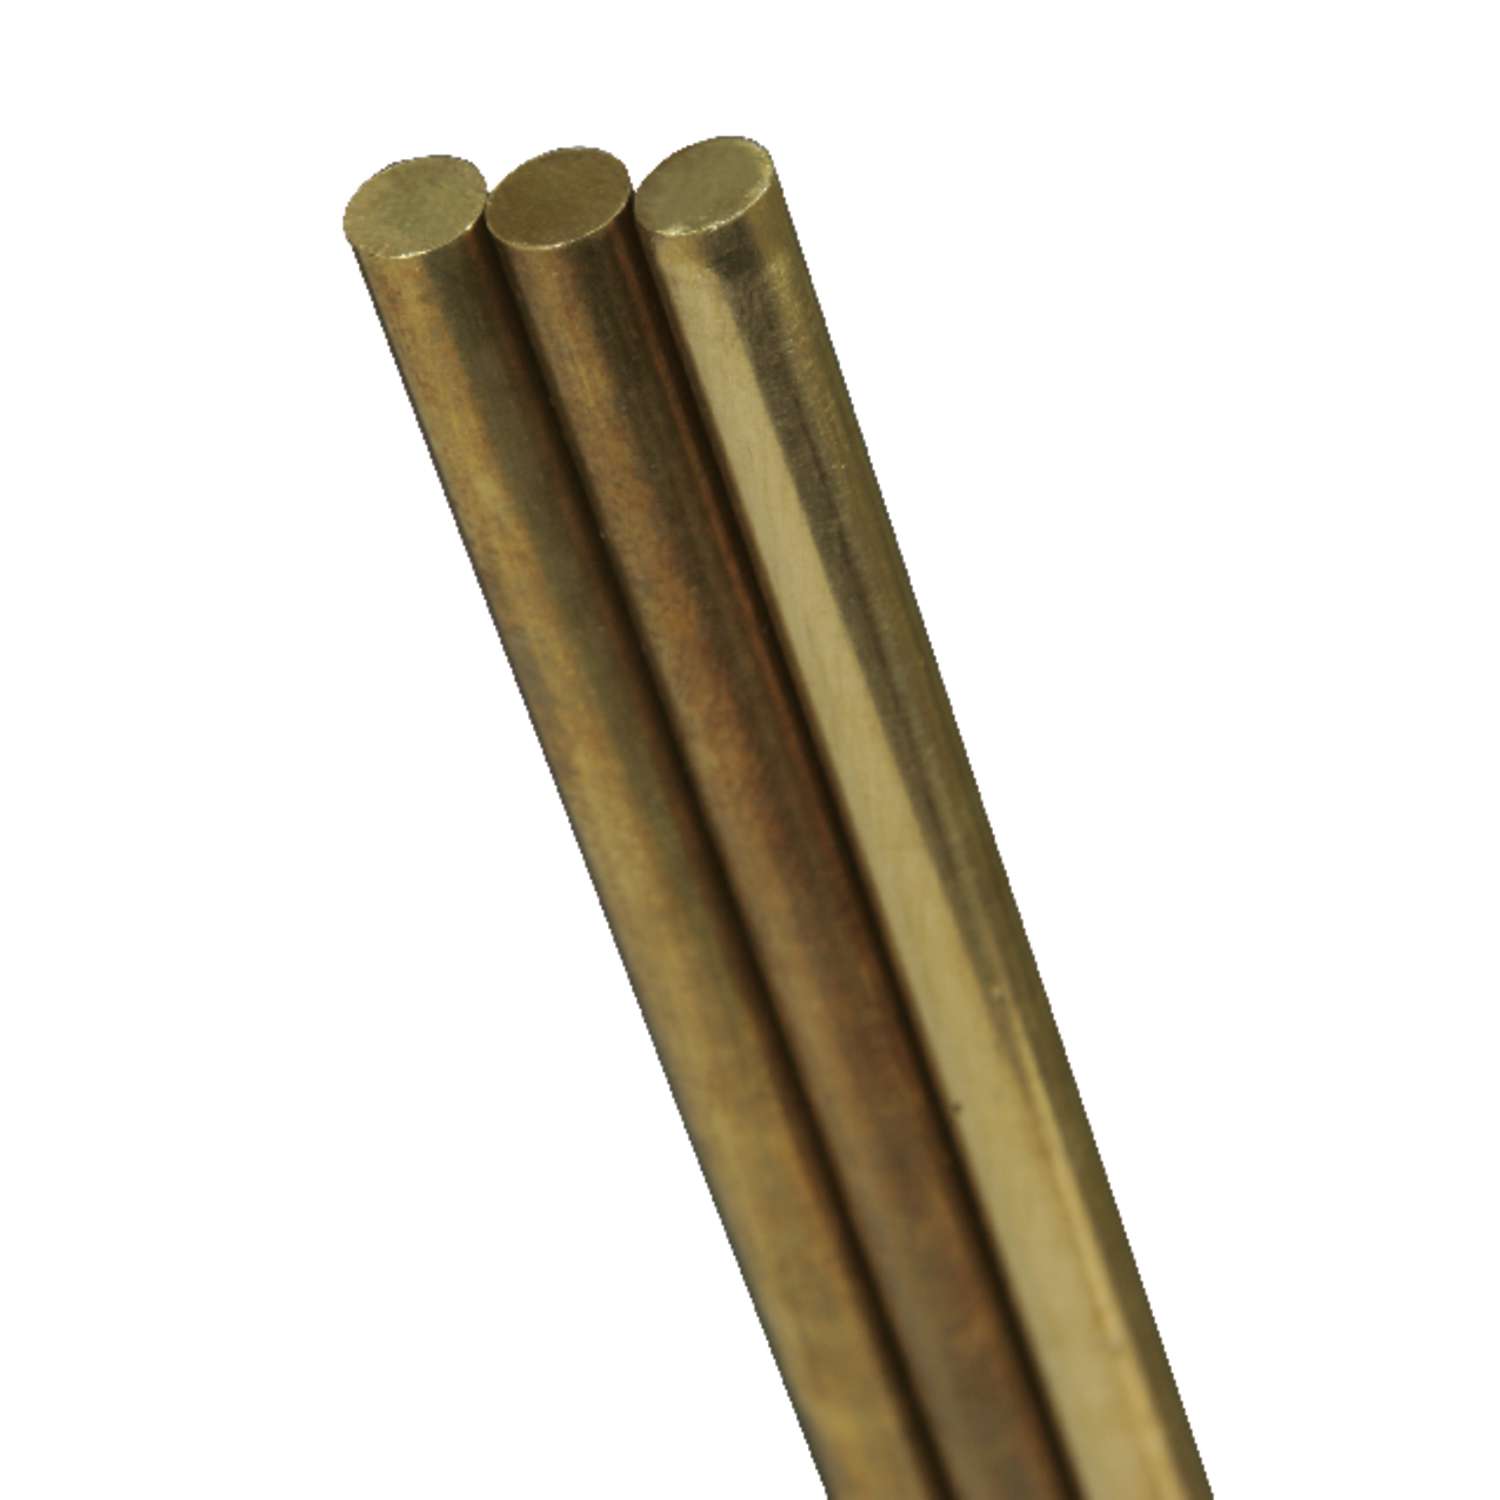 Solid Brass Rod 1/16" X 8" Long 2 pieces 